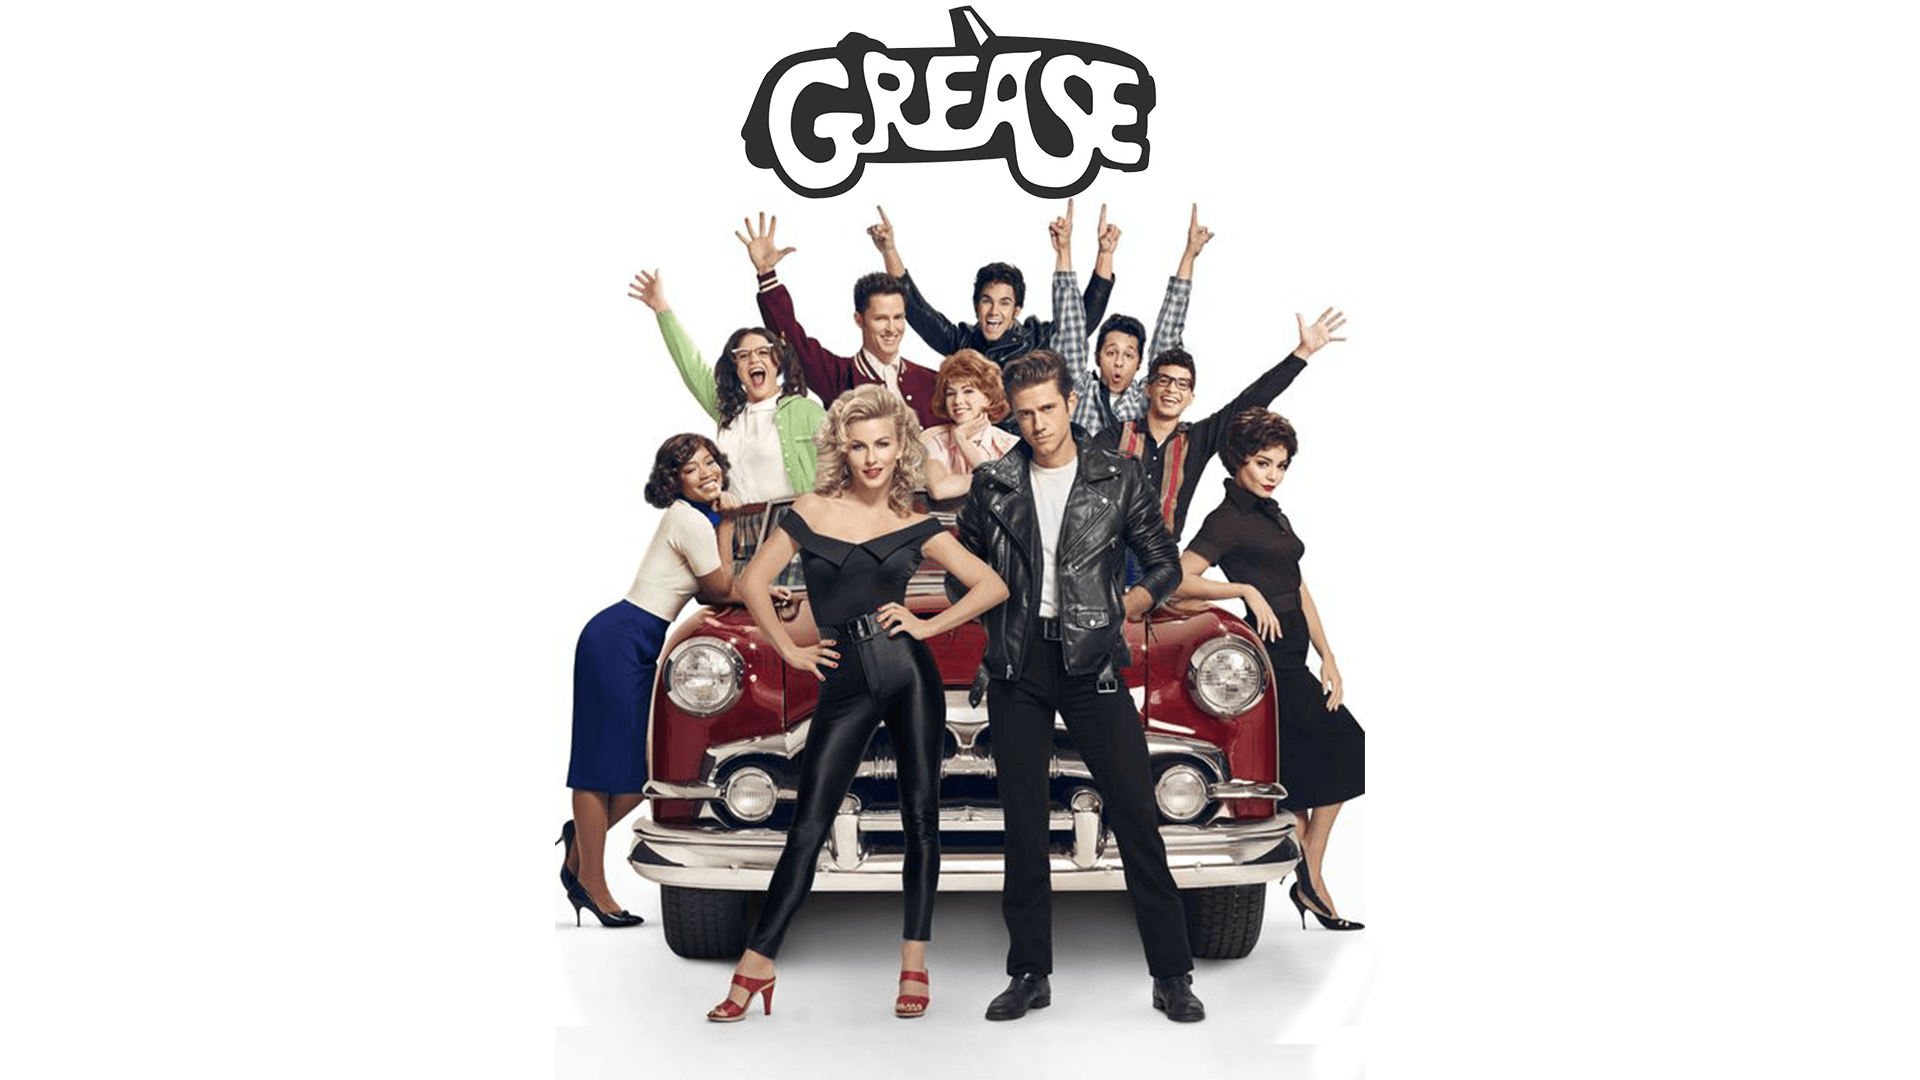 Grease Wallpaper, Most Beautiful Pics of Grease, Colelction ID: ISQ57